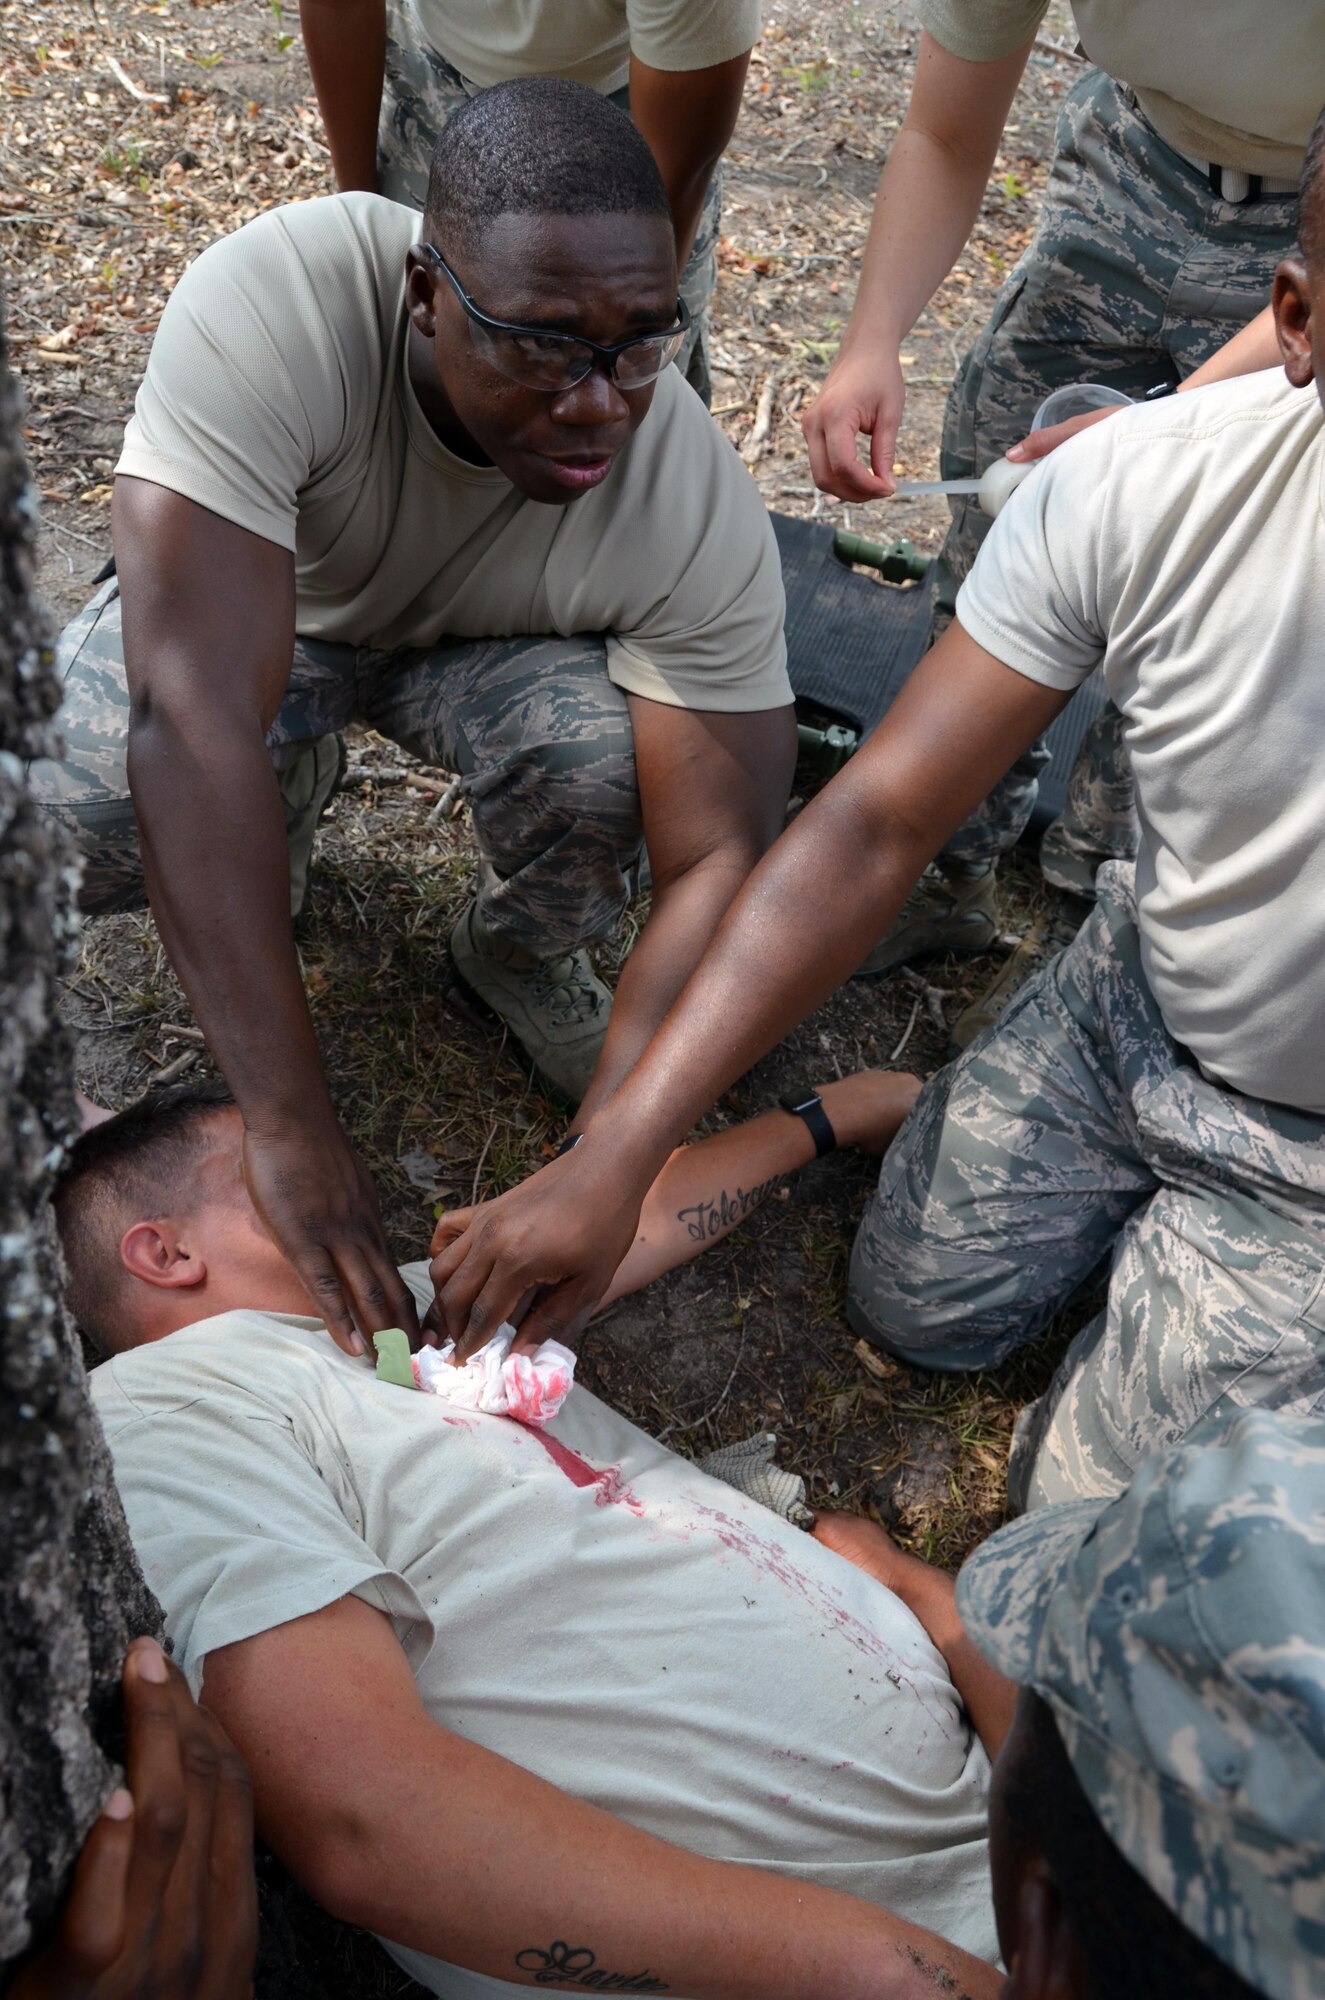 2nd Lieutenant Willy Gedeon, Chaplain Candidate, provides self-aid buddy care by holding pressure on an open wound during a training scenario with "wounded" civilians at Robins Air Force Base, Georgia, July 25. The candidates are participants in the Air Force Reserve Command Chaplain Candidate Intensive Interview program which aims to provide an extensive overview of the Air Force Reserve mission and military chaplain corps.(U.S. Air Force photo/Tech. Sgt. Kelly Goonan)